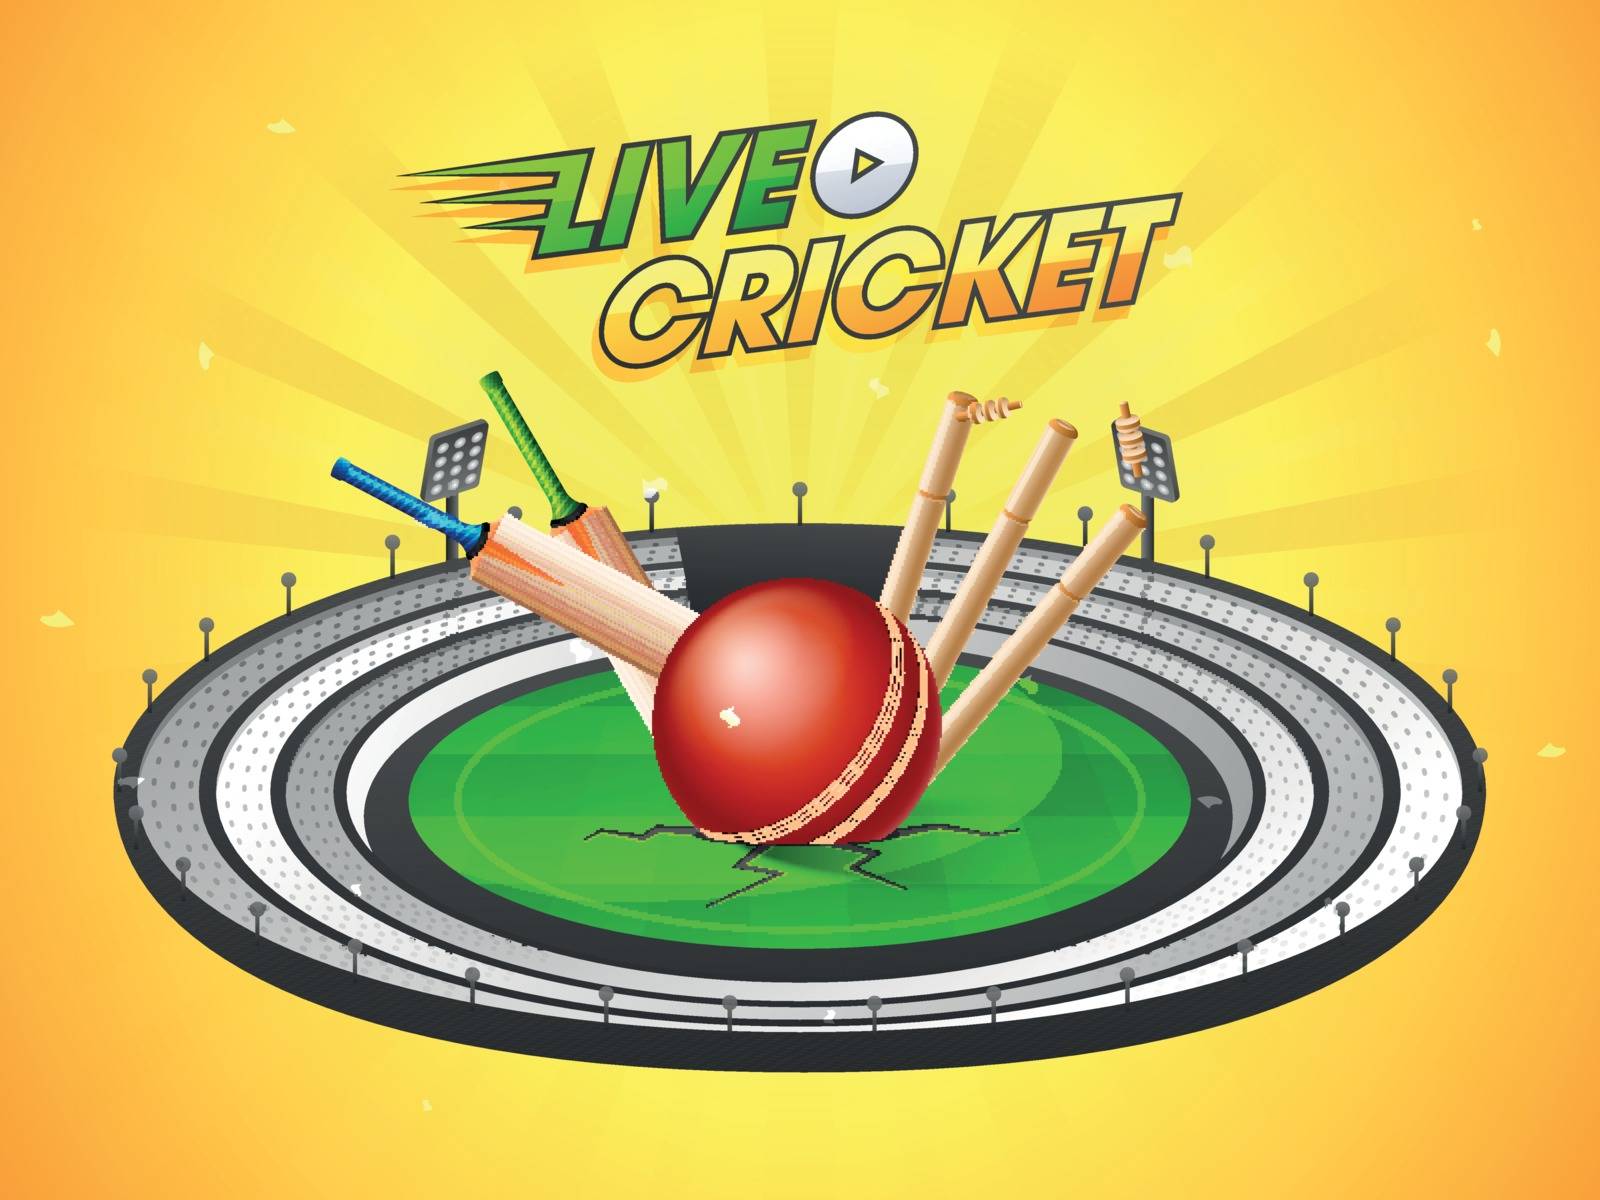 Live Cricket match banner or poster design with cricket equipmen Stock  Image | VectorGrove - Royalty Free Vector Images with commercial license